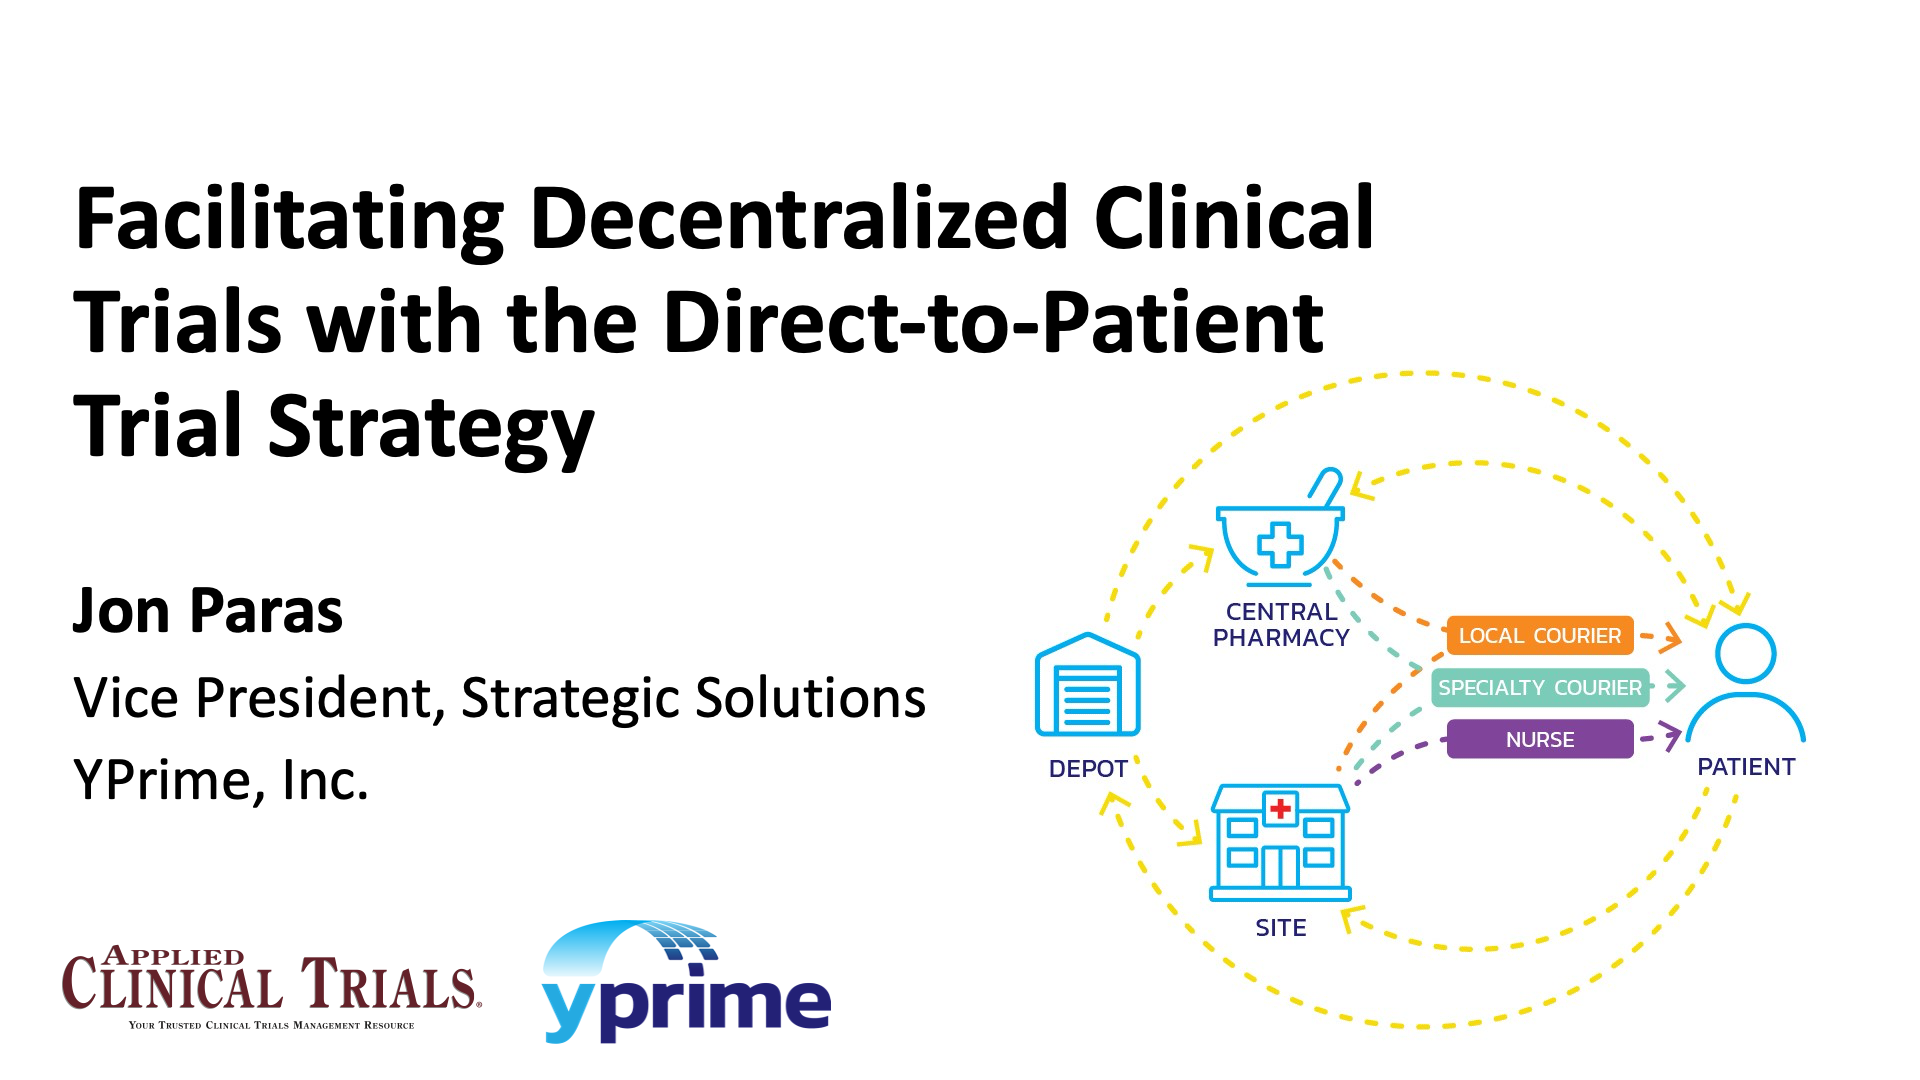 Facilitating Decentralized Clinical Trials with the Direct-to-Patient Trial Strategy